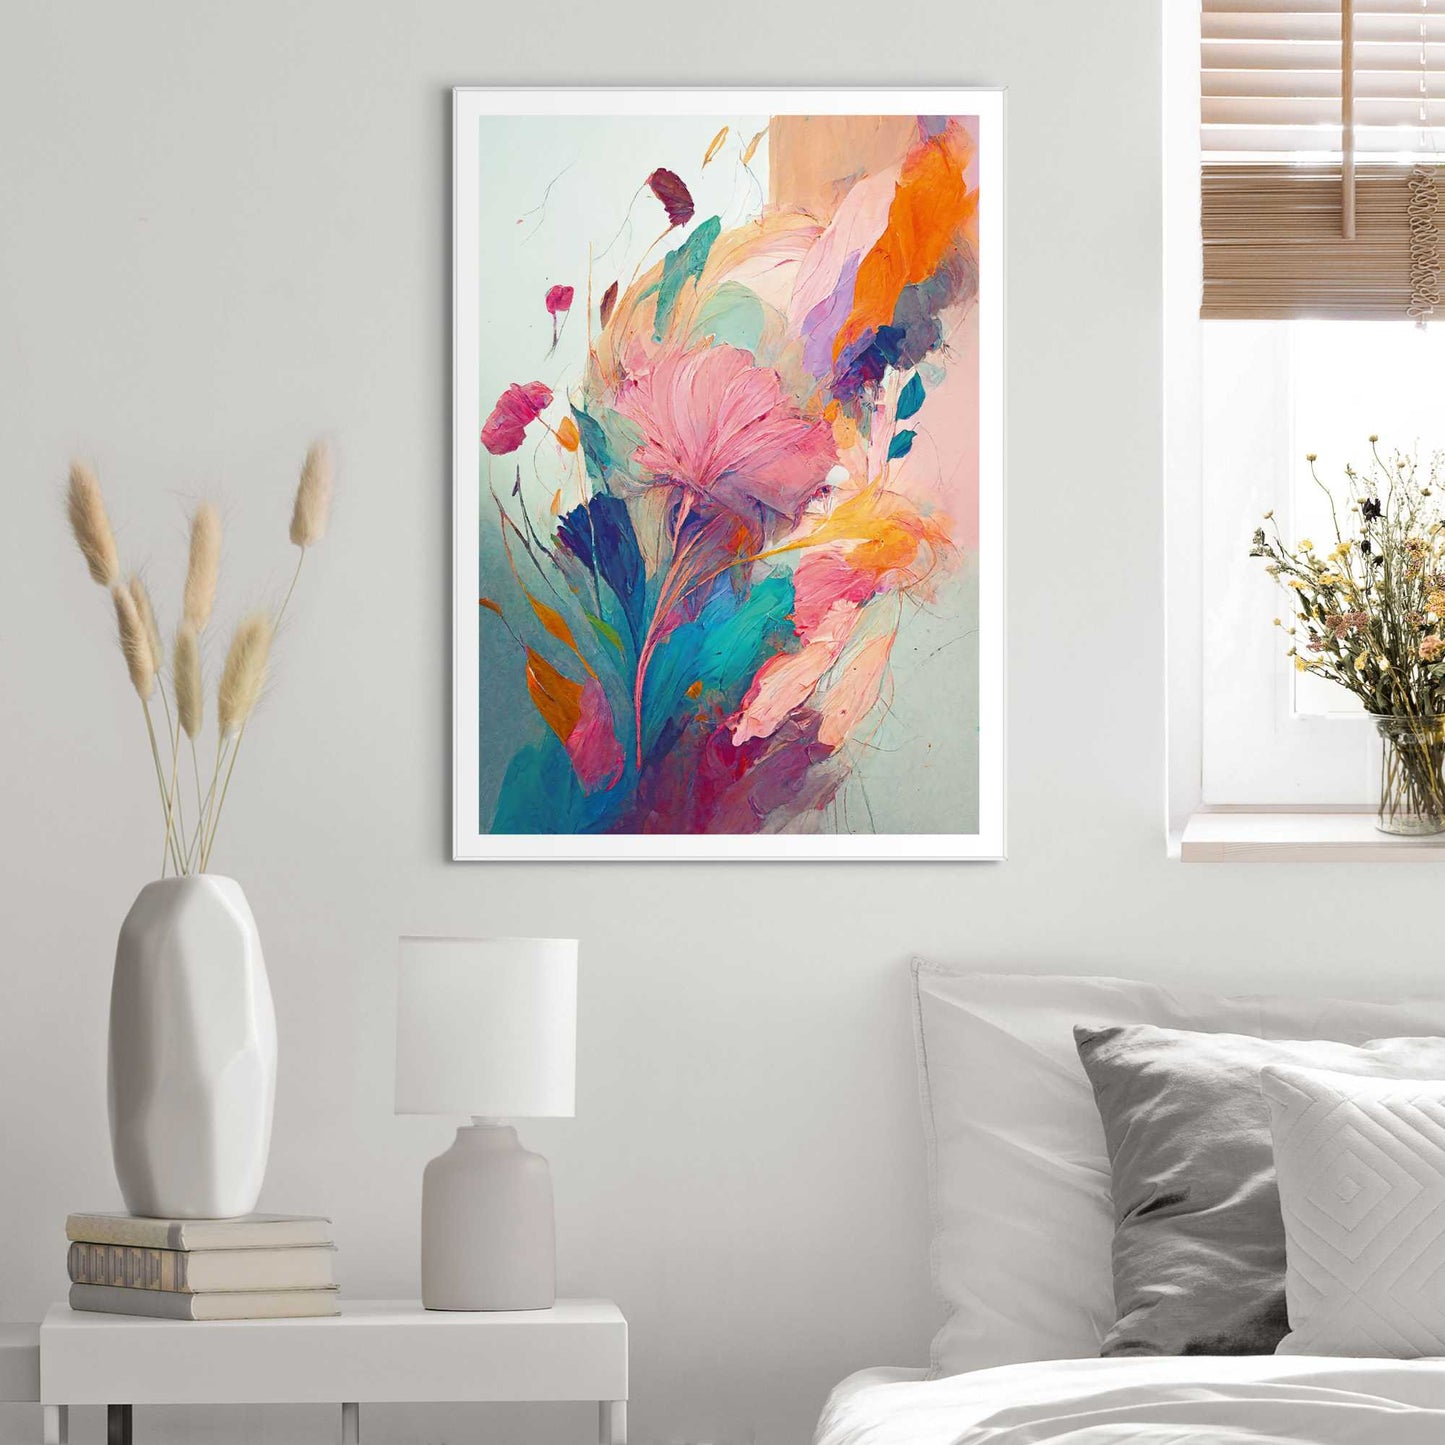 Framed in White Colourful Painted Flowers I 70x50